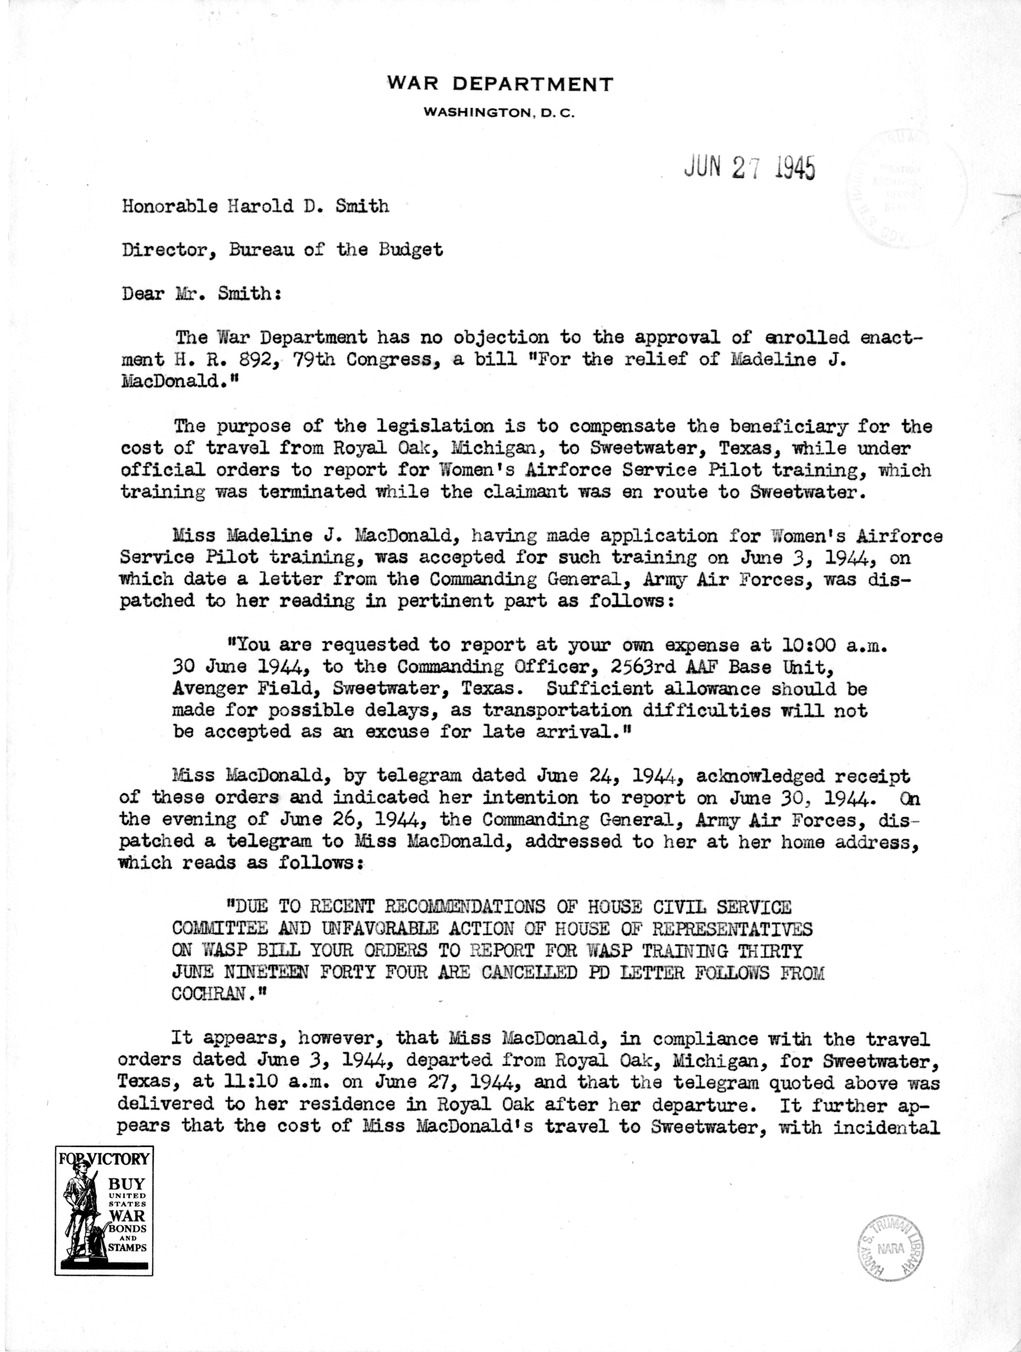 Memorandum from Frederick Bailey to M. C. Latta, H.R. 892, for the Relief of Madeline J. MacDonald, with Attachments